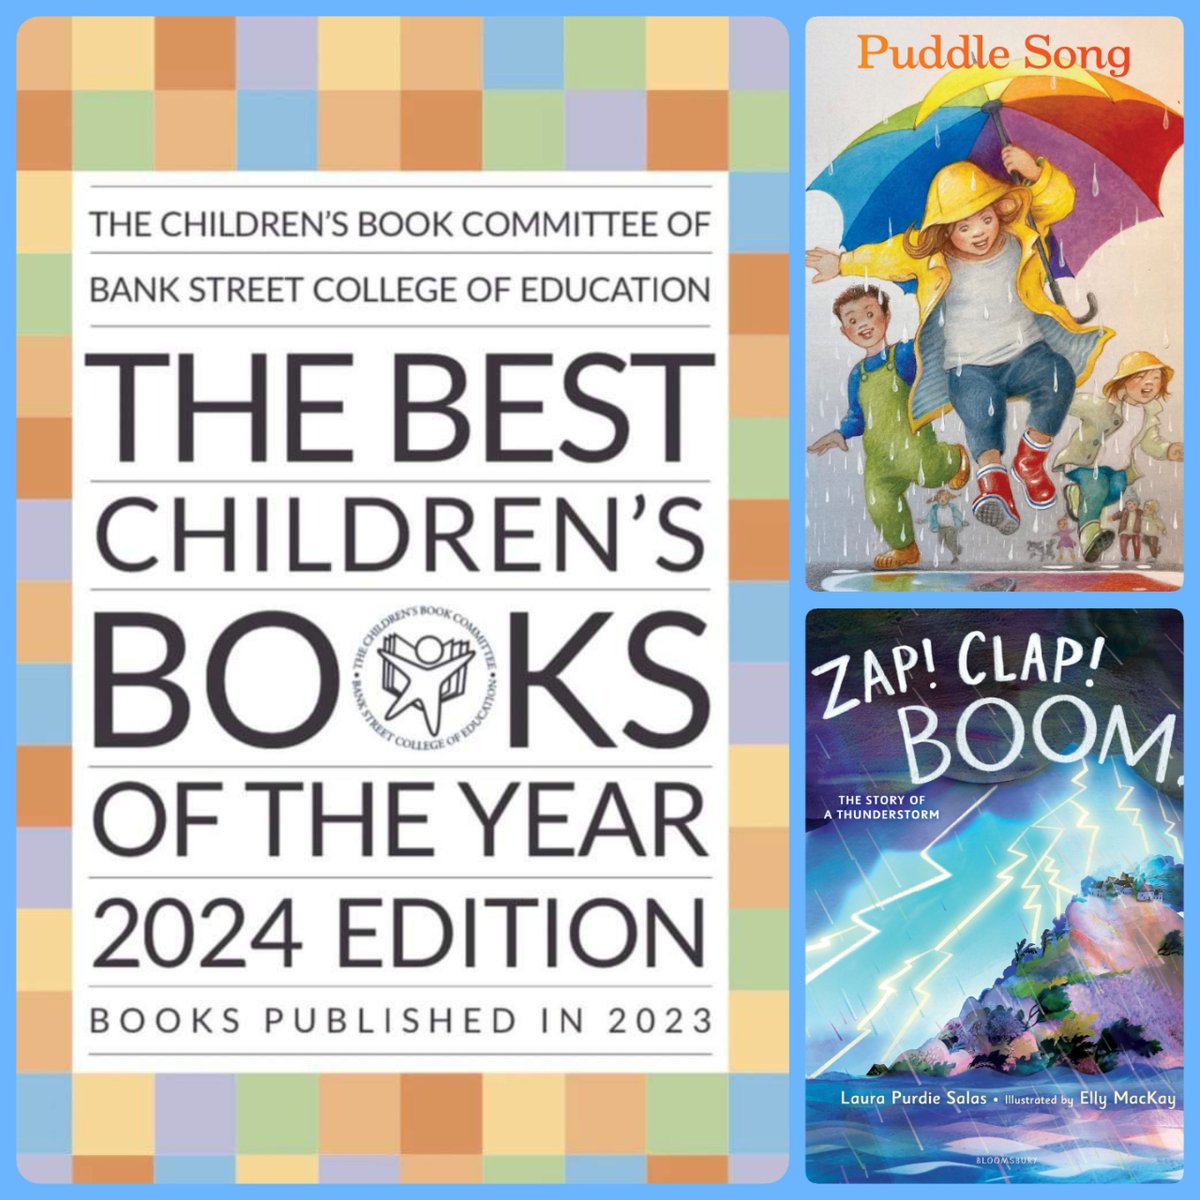 Happy day! Bank Street has compiled its list of Best Children's Books of the Year, and PUDDLE SONG and ZAP! CLAP! BOOM! are included. Excited to be there with many fabulous creators, inc M Gianferrari, M Stewart, K Rogers, C Doerrfeld, J Petrus, D LaRochelle, M Wohnoutka, & more!